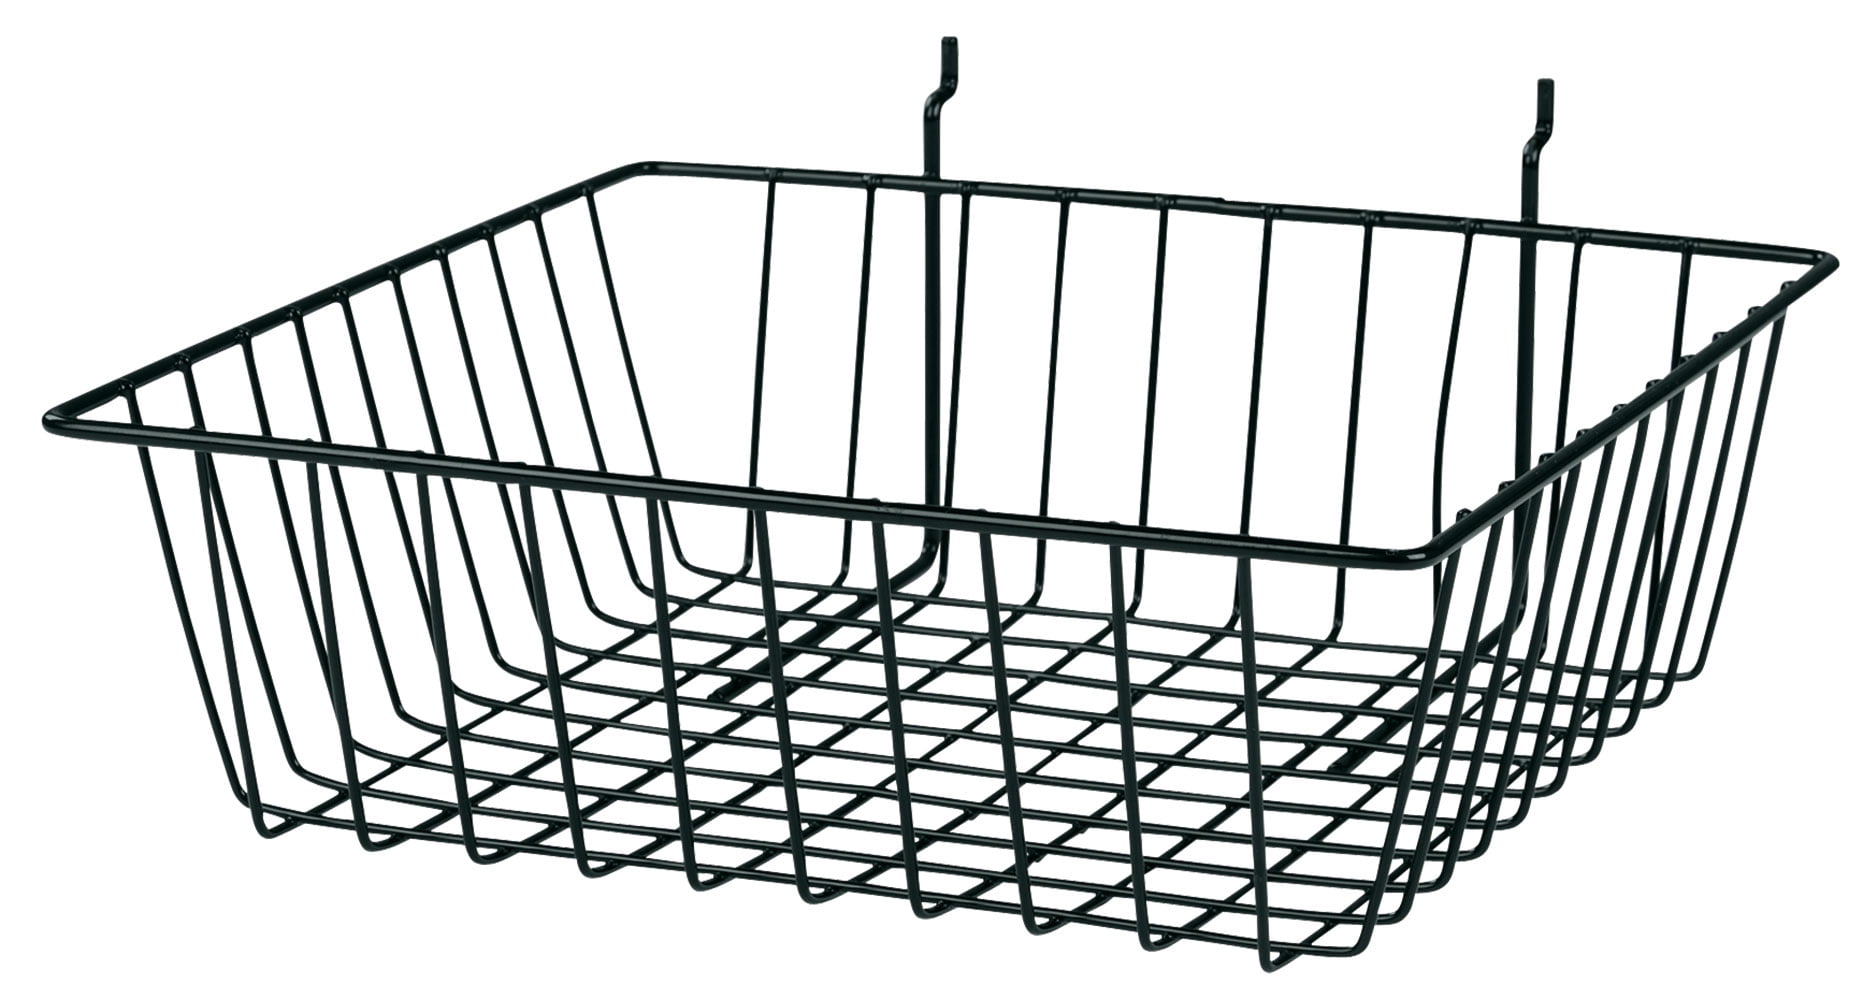 NEW PACK OF 2 SLATWALL OR GRID BASKETS 24"x12"x4" WHITE 